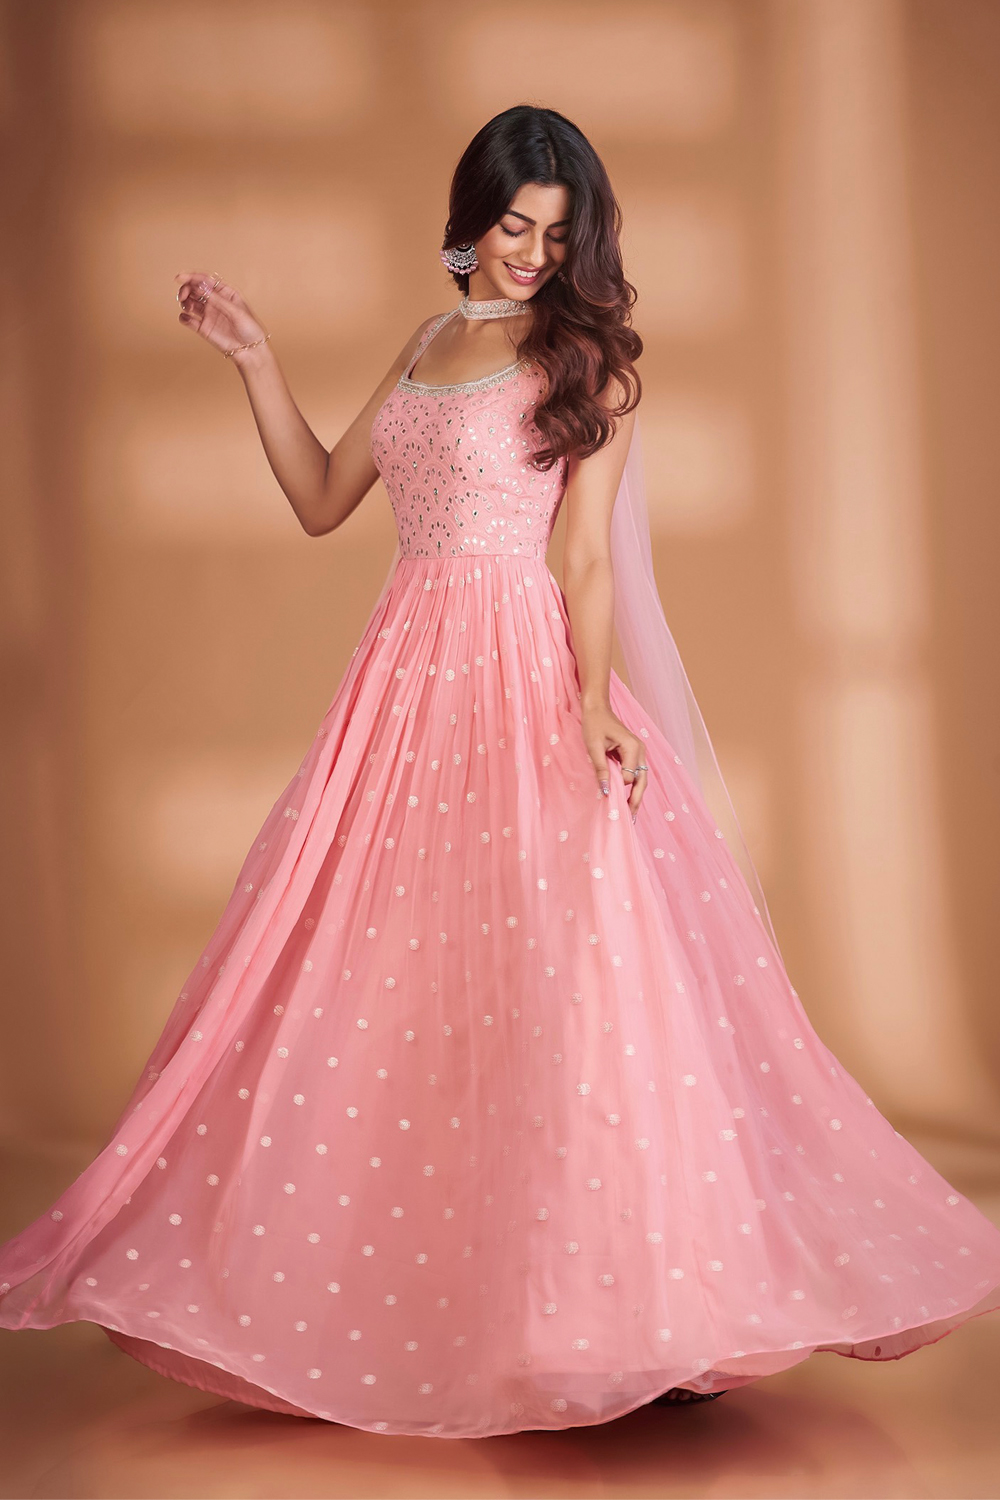 Best Party Wear Indian Garments of 2021 | Hunar Online Courses